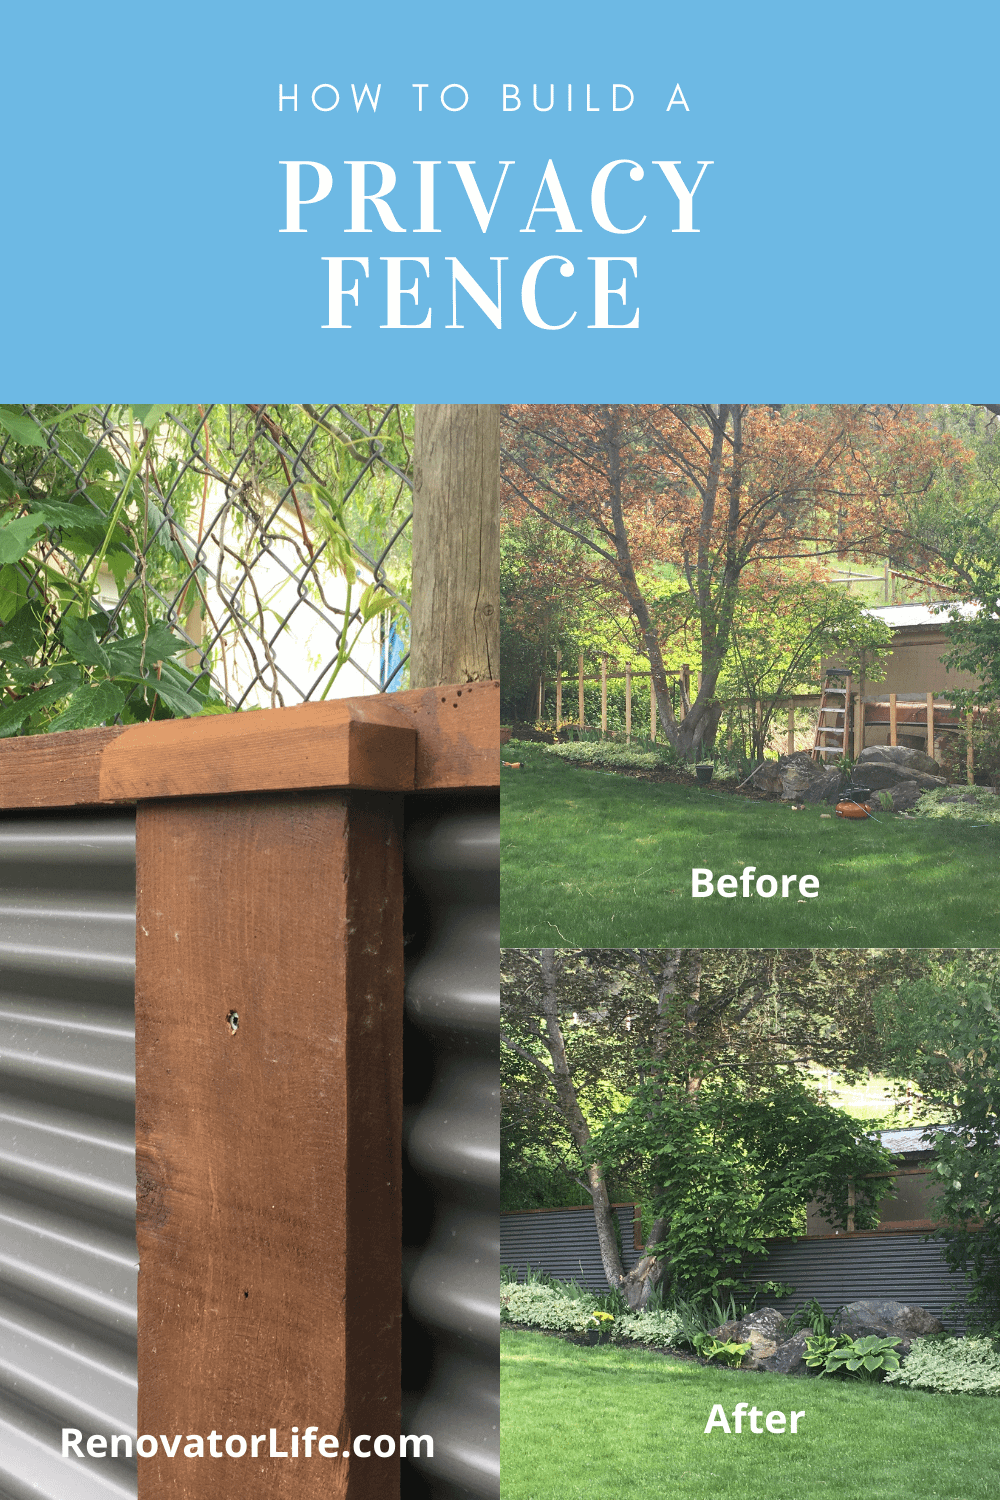 How to build a Privacy Fence